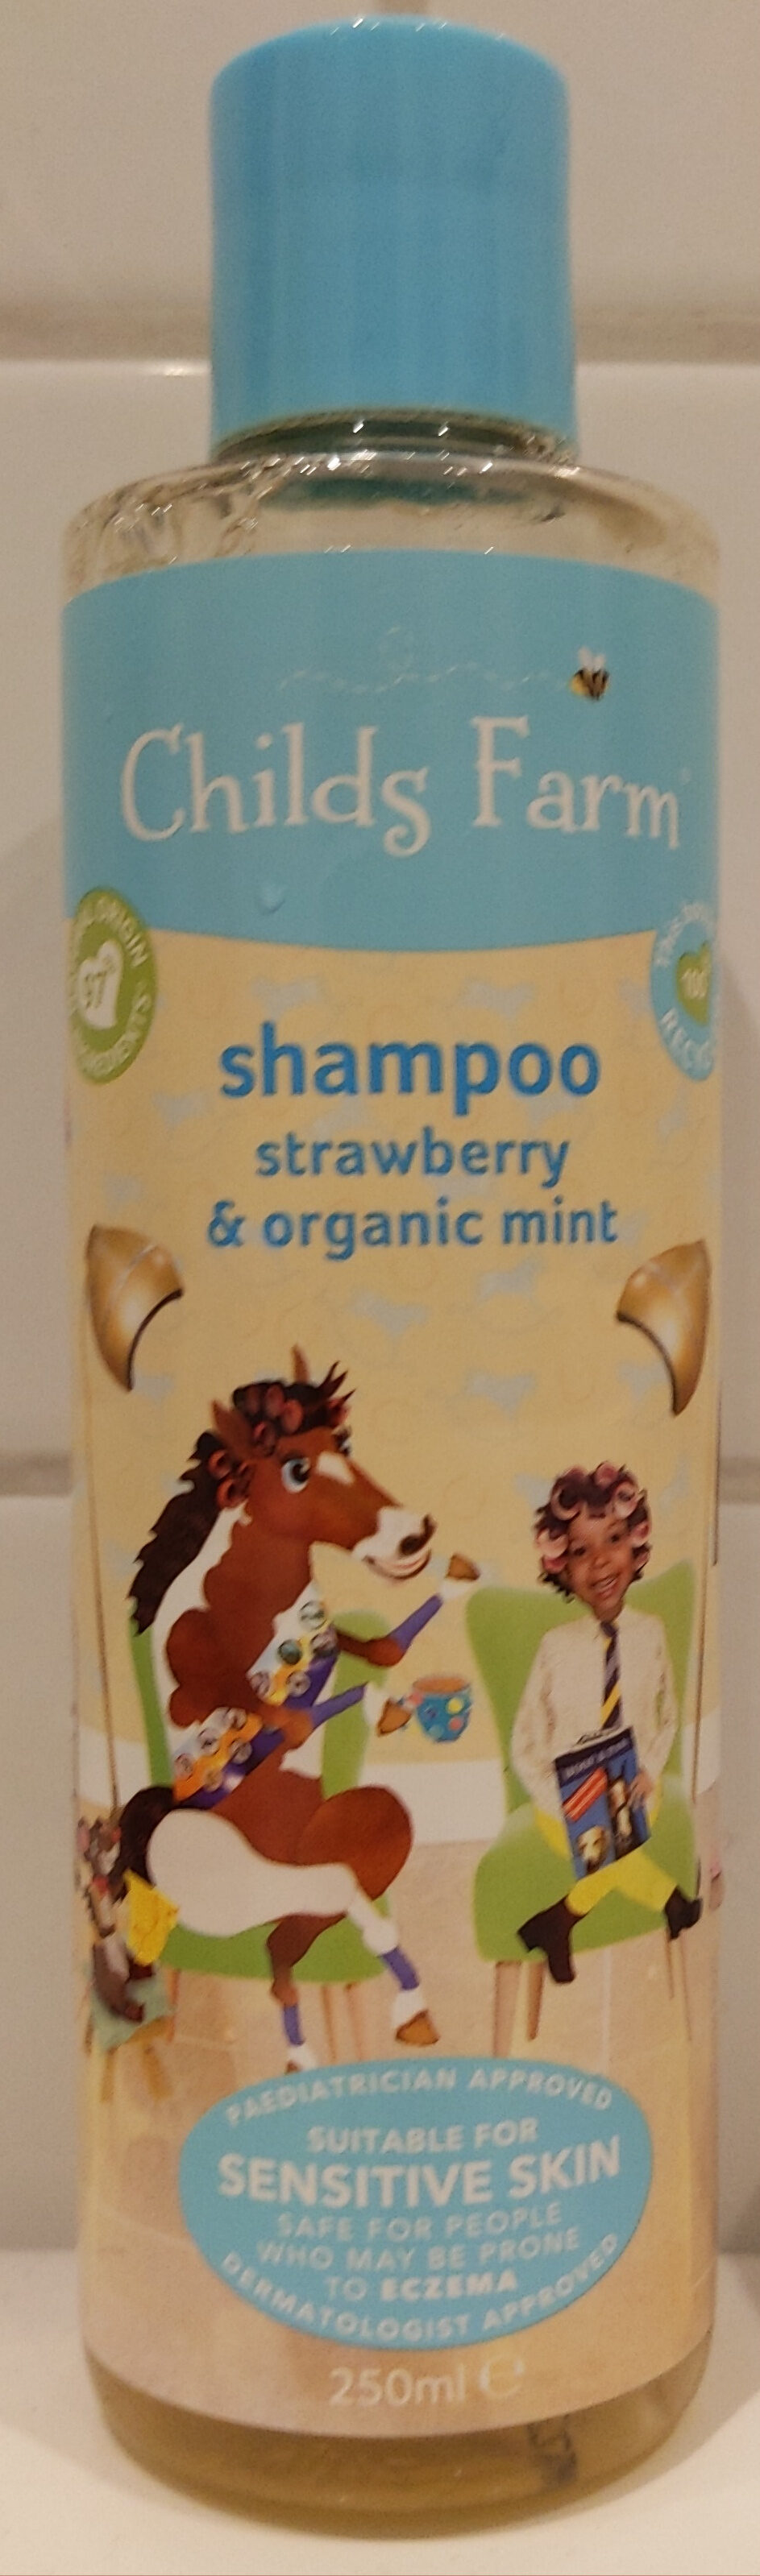 Strawberry and organic mint shampoo - Tuote - en